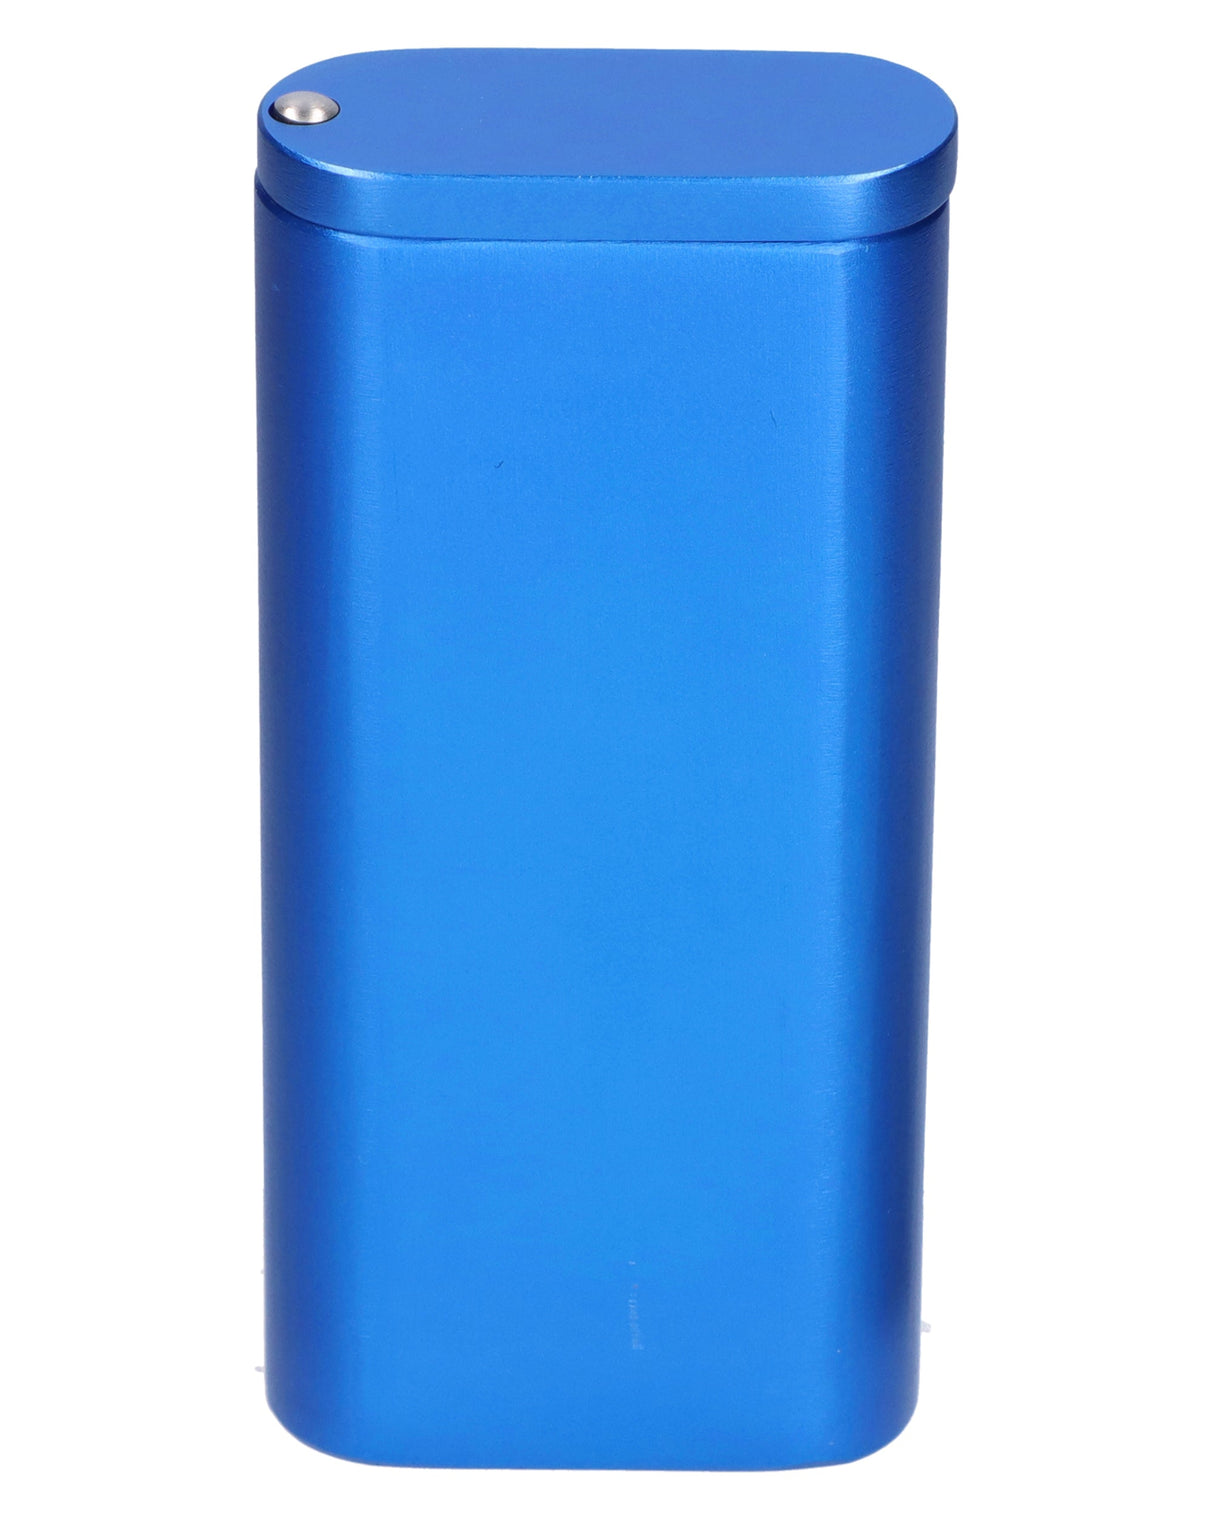 Navy blue 4" Valiant Distribution dugout kit with one-hitter, portable design, front view